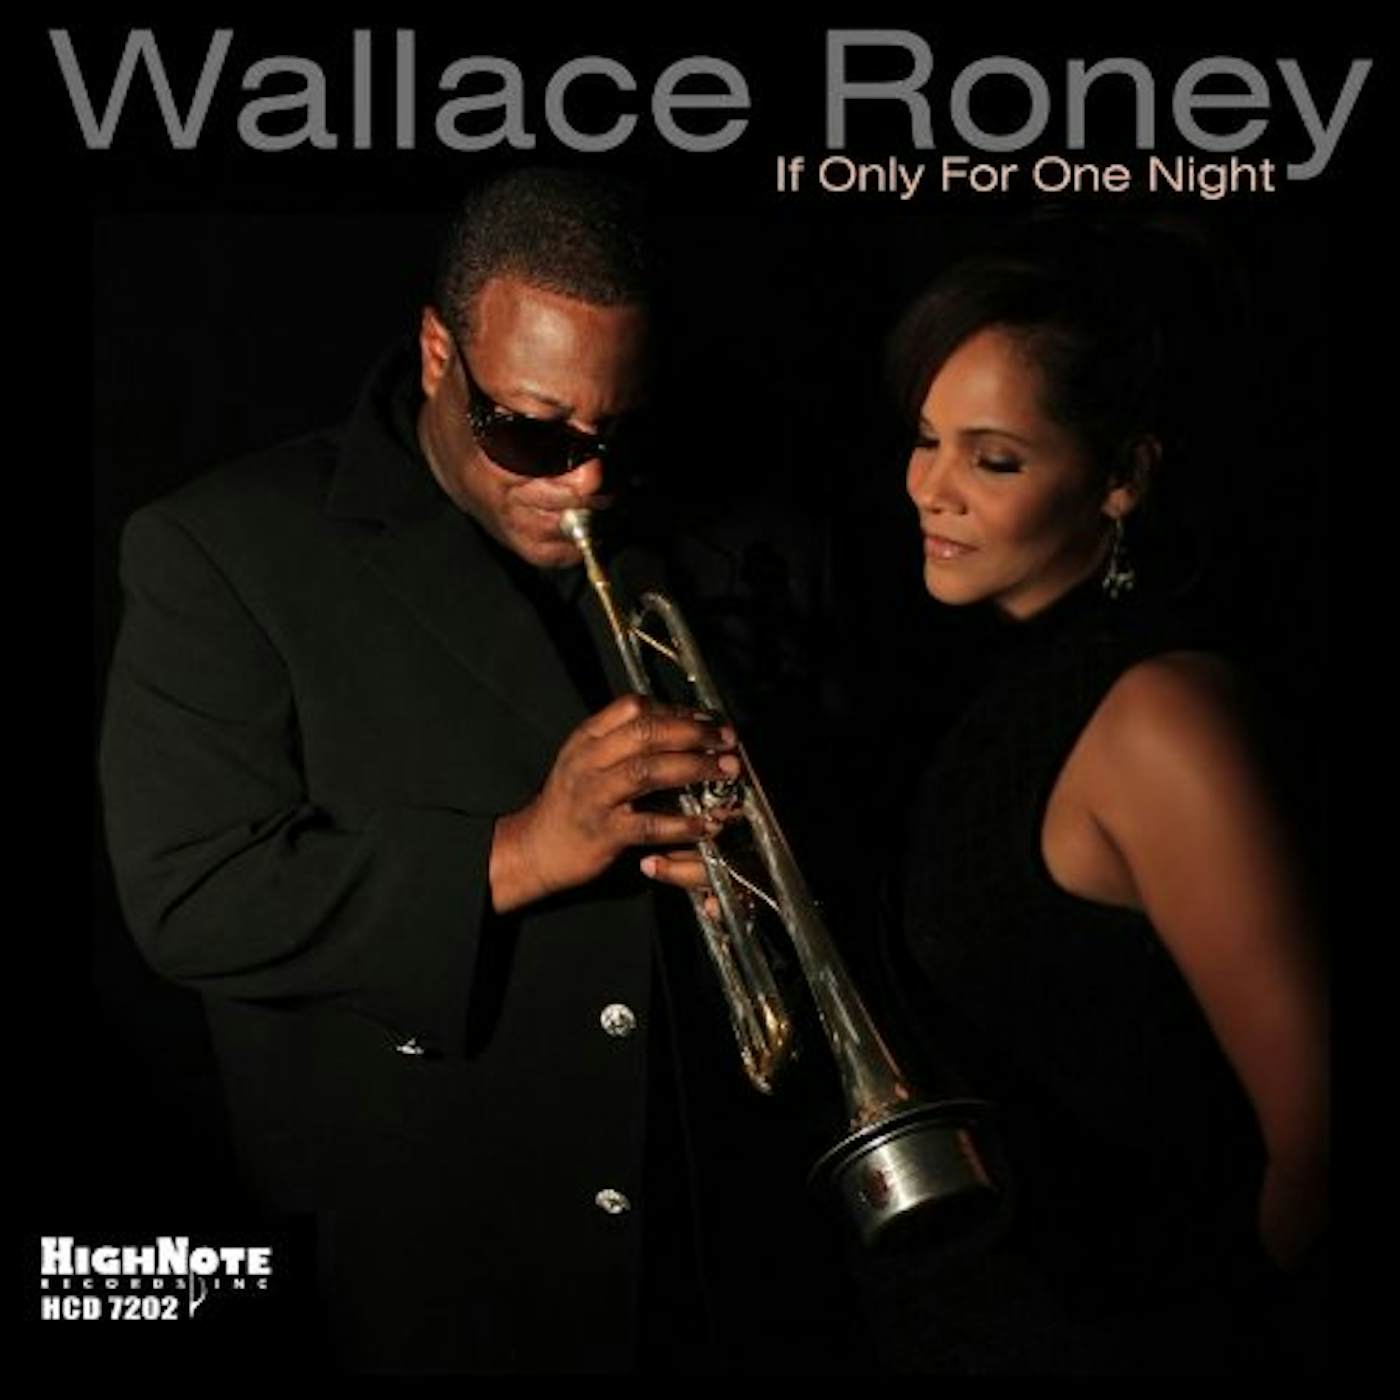 Wallace Roney IF ONLY FOR ONE NIGHT CD